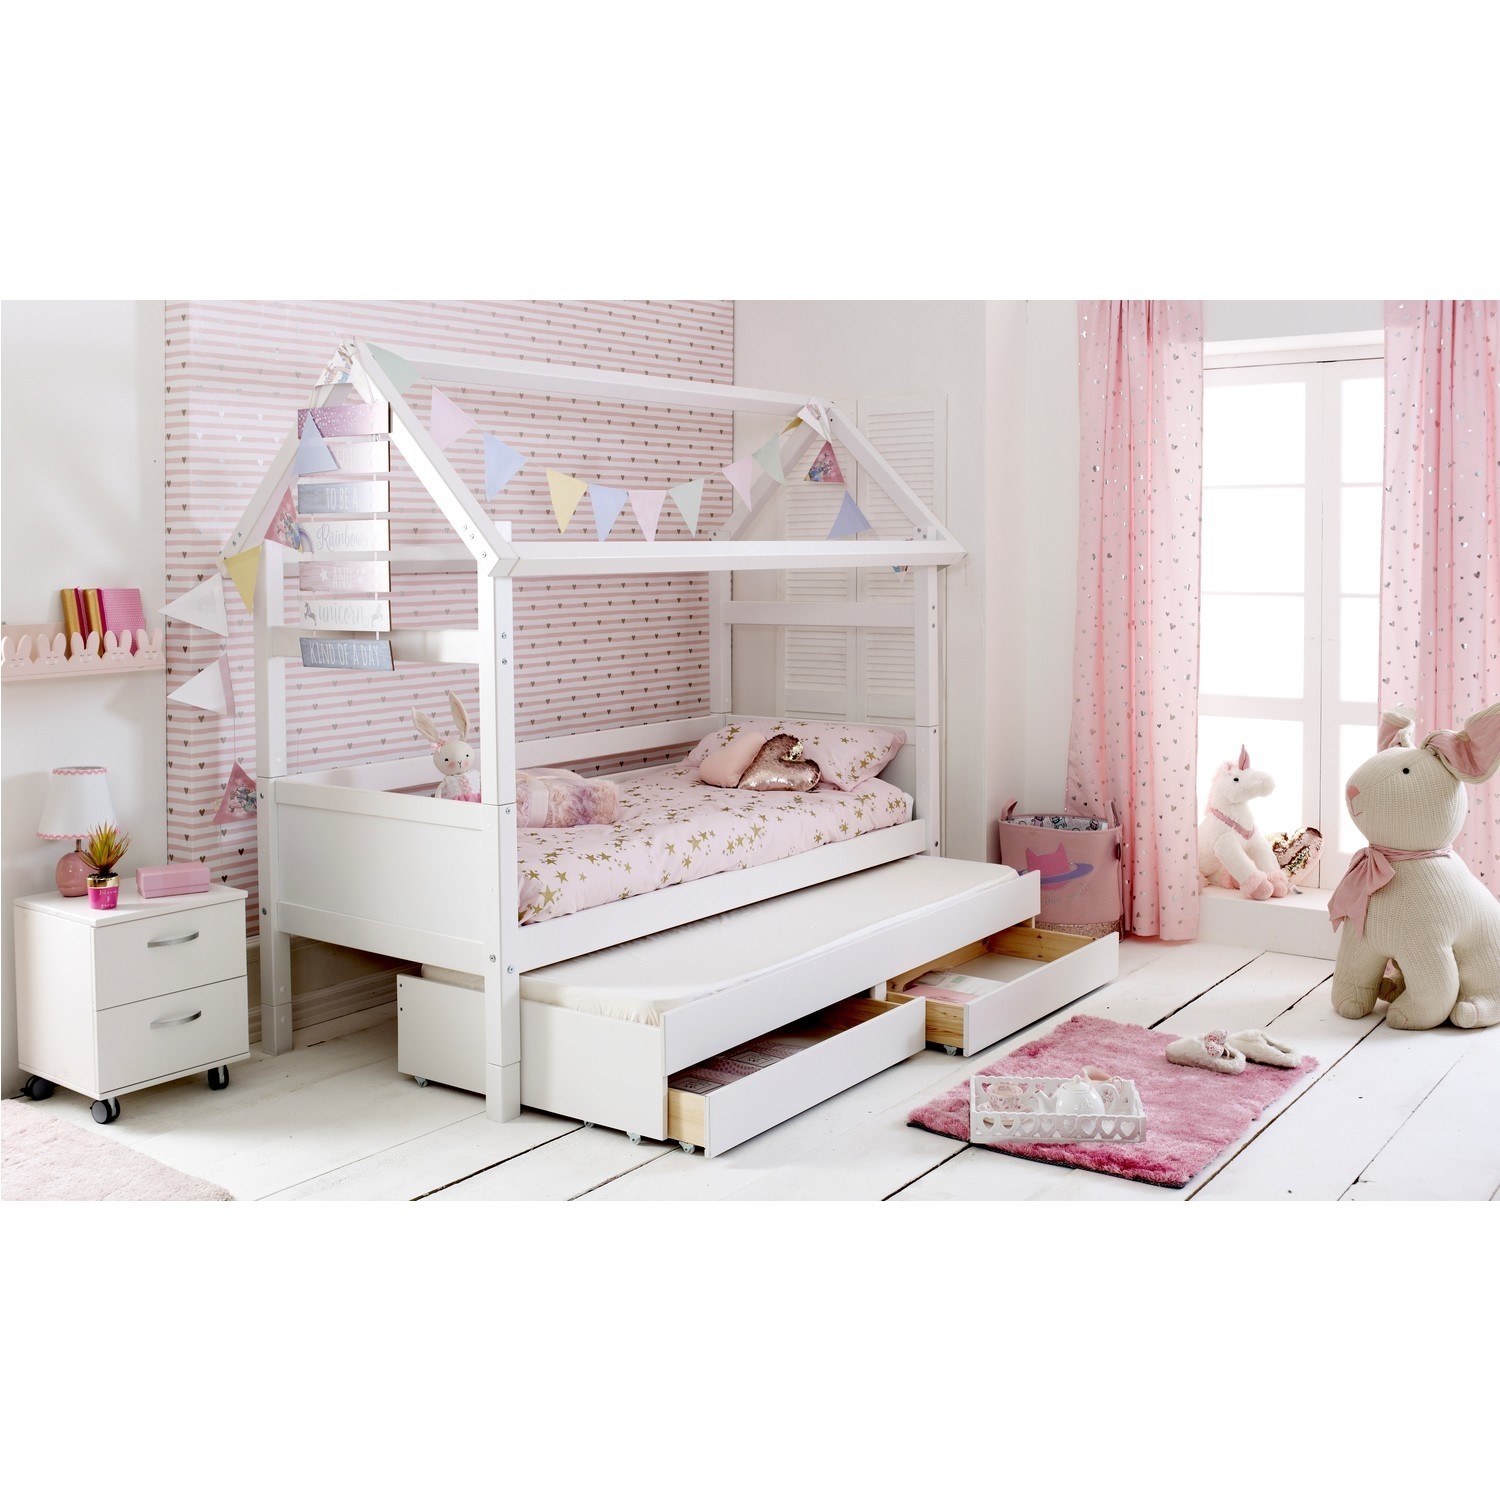 Read more about White wooden house bed with trundle and storage drawers nordic kids avenue